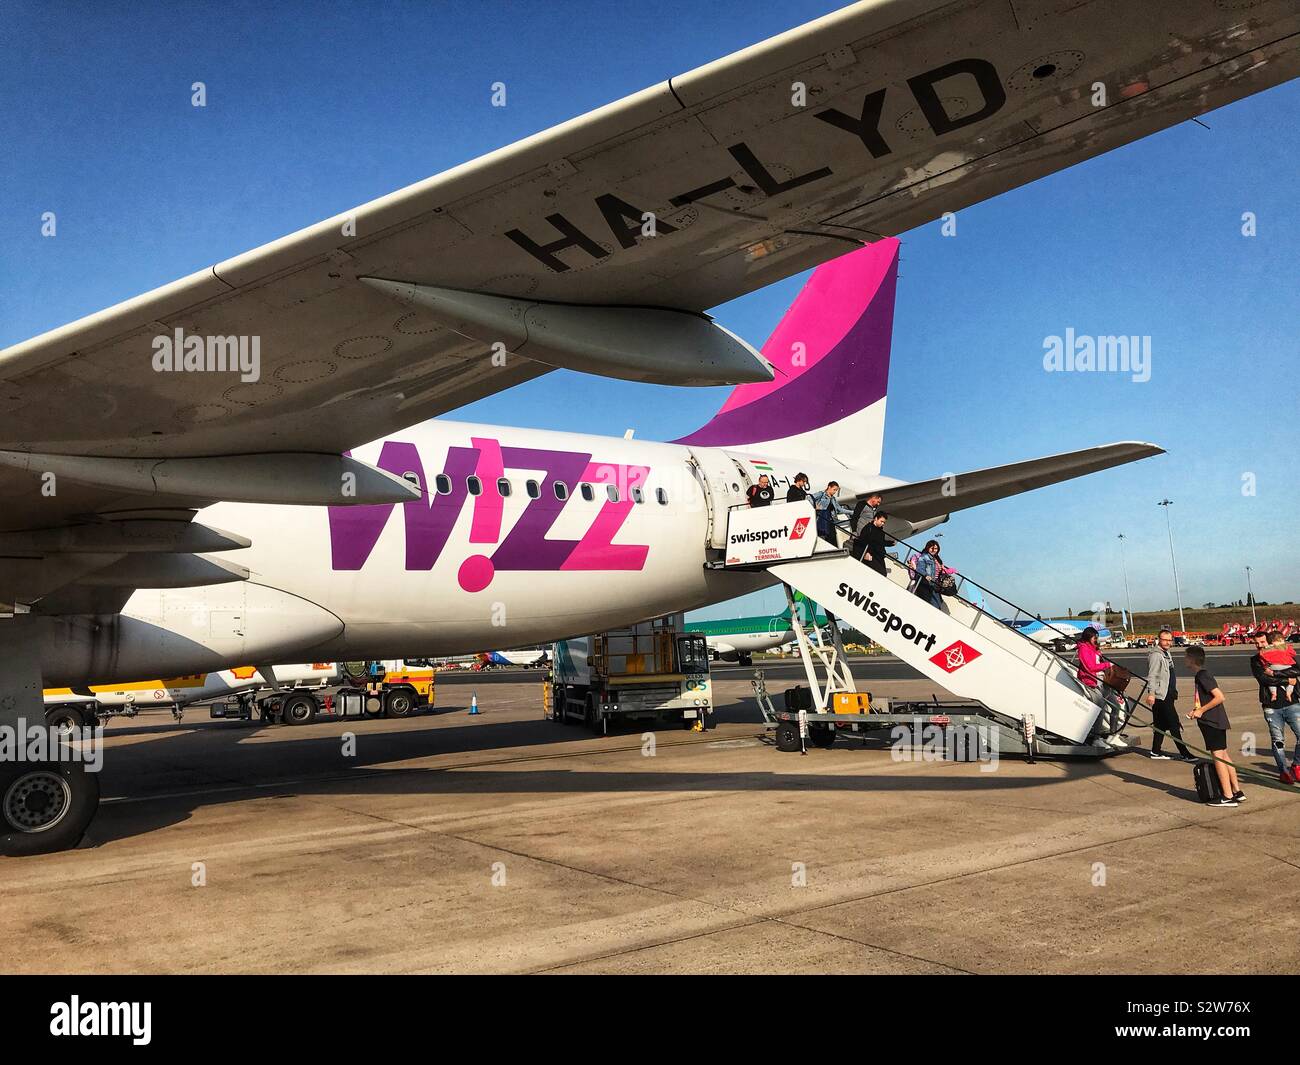 Passengers disembark from a Wizzair Airbus A320. The Hungarian airline is a major European low cost carrier. Stock Photo